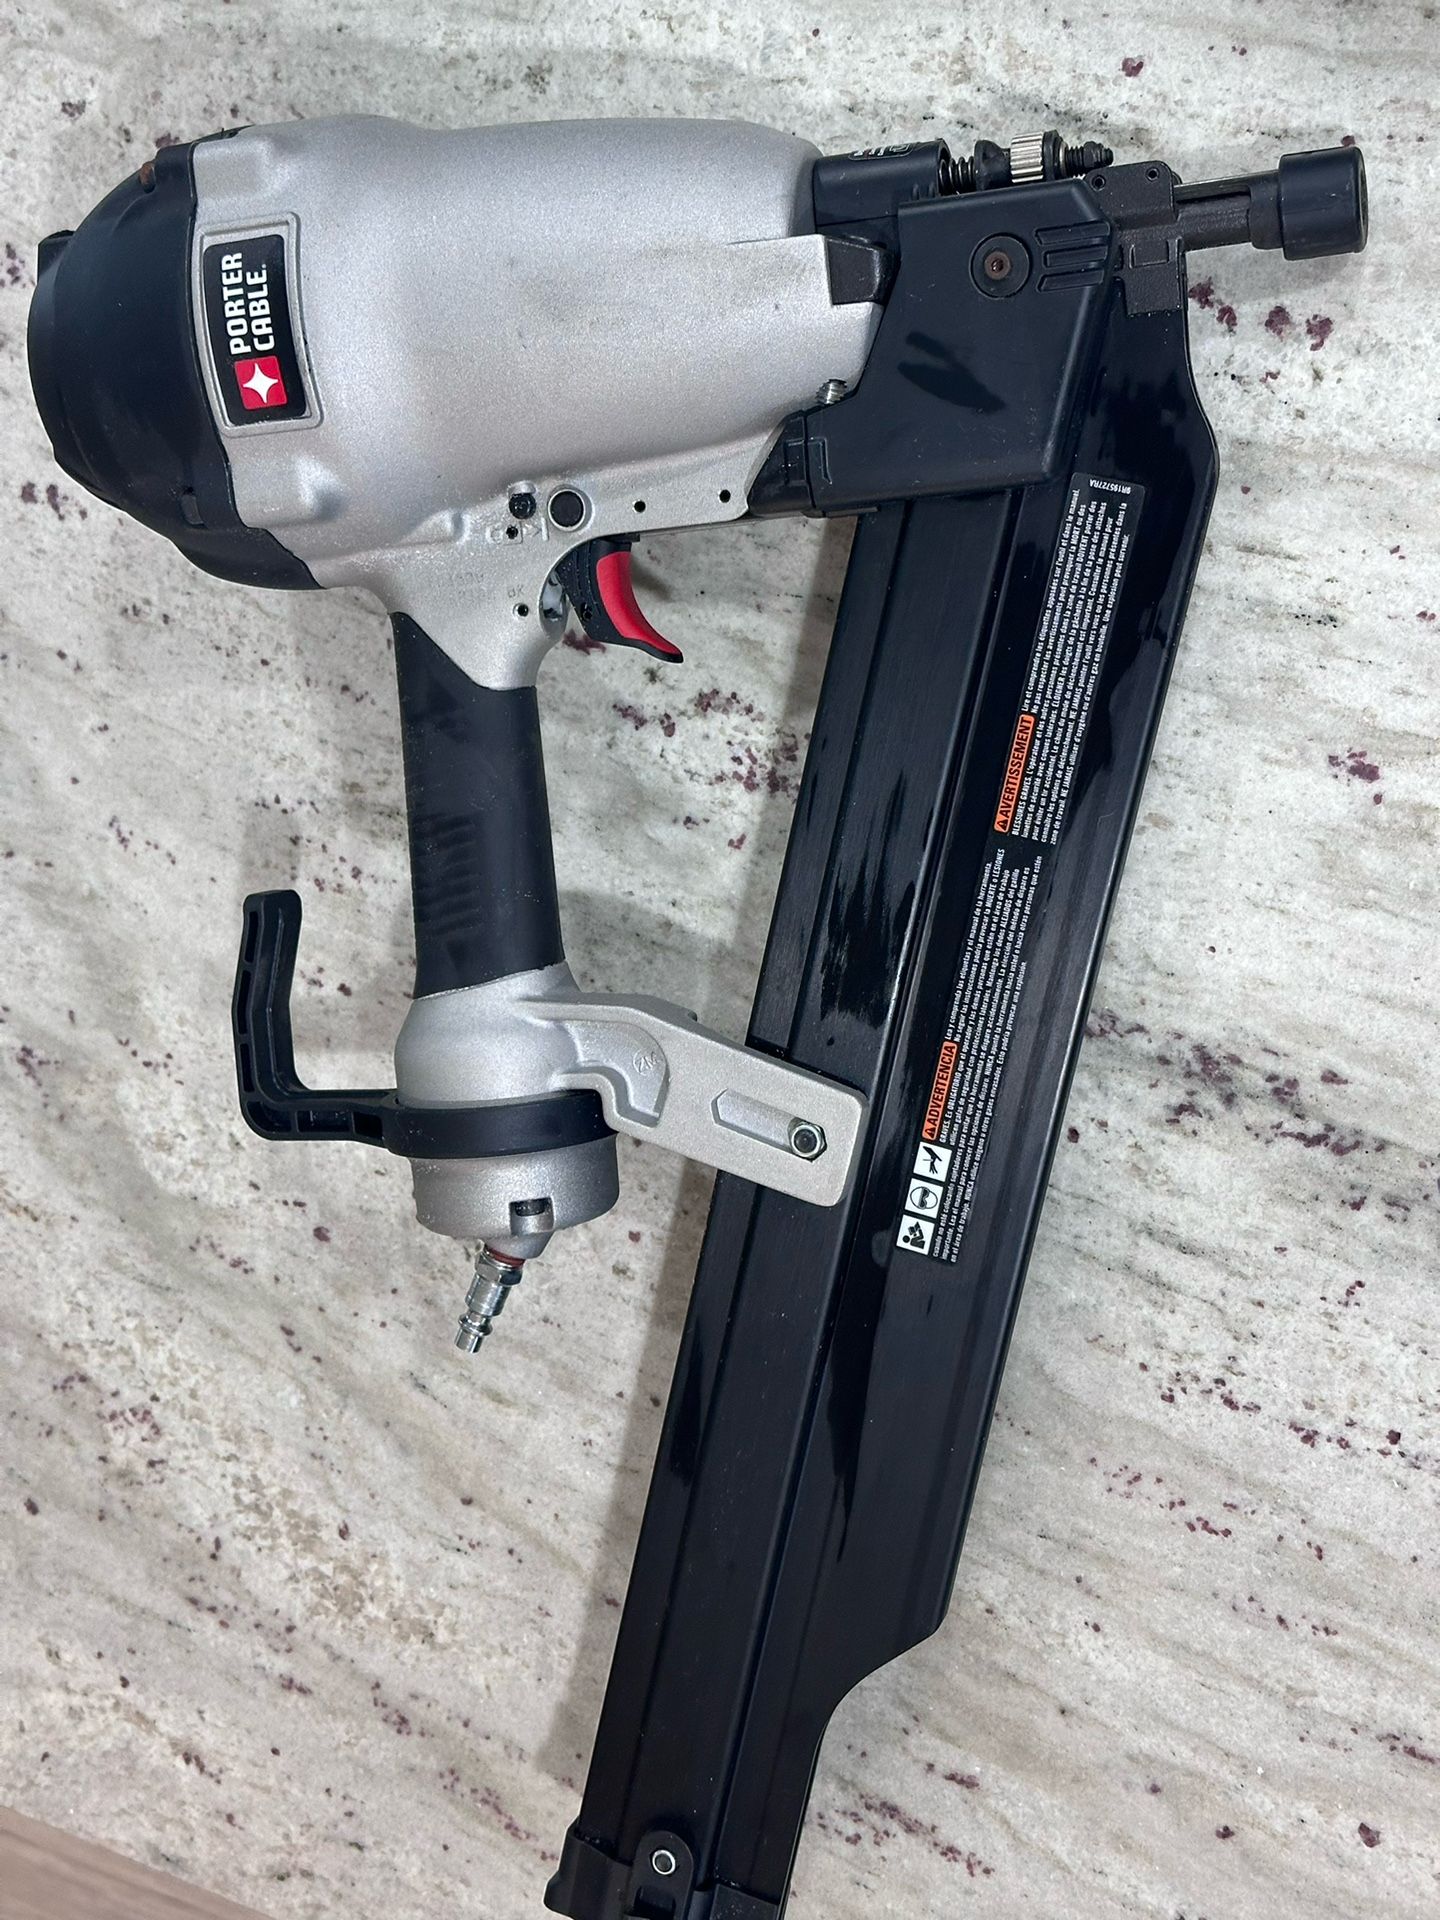 Porter-Cable 21-Degree 3-1/2 in. Full Round Framing Nailer